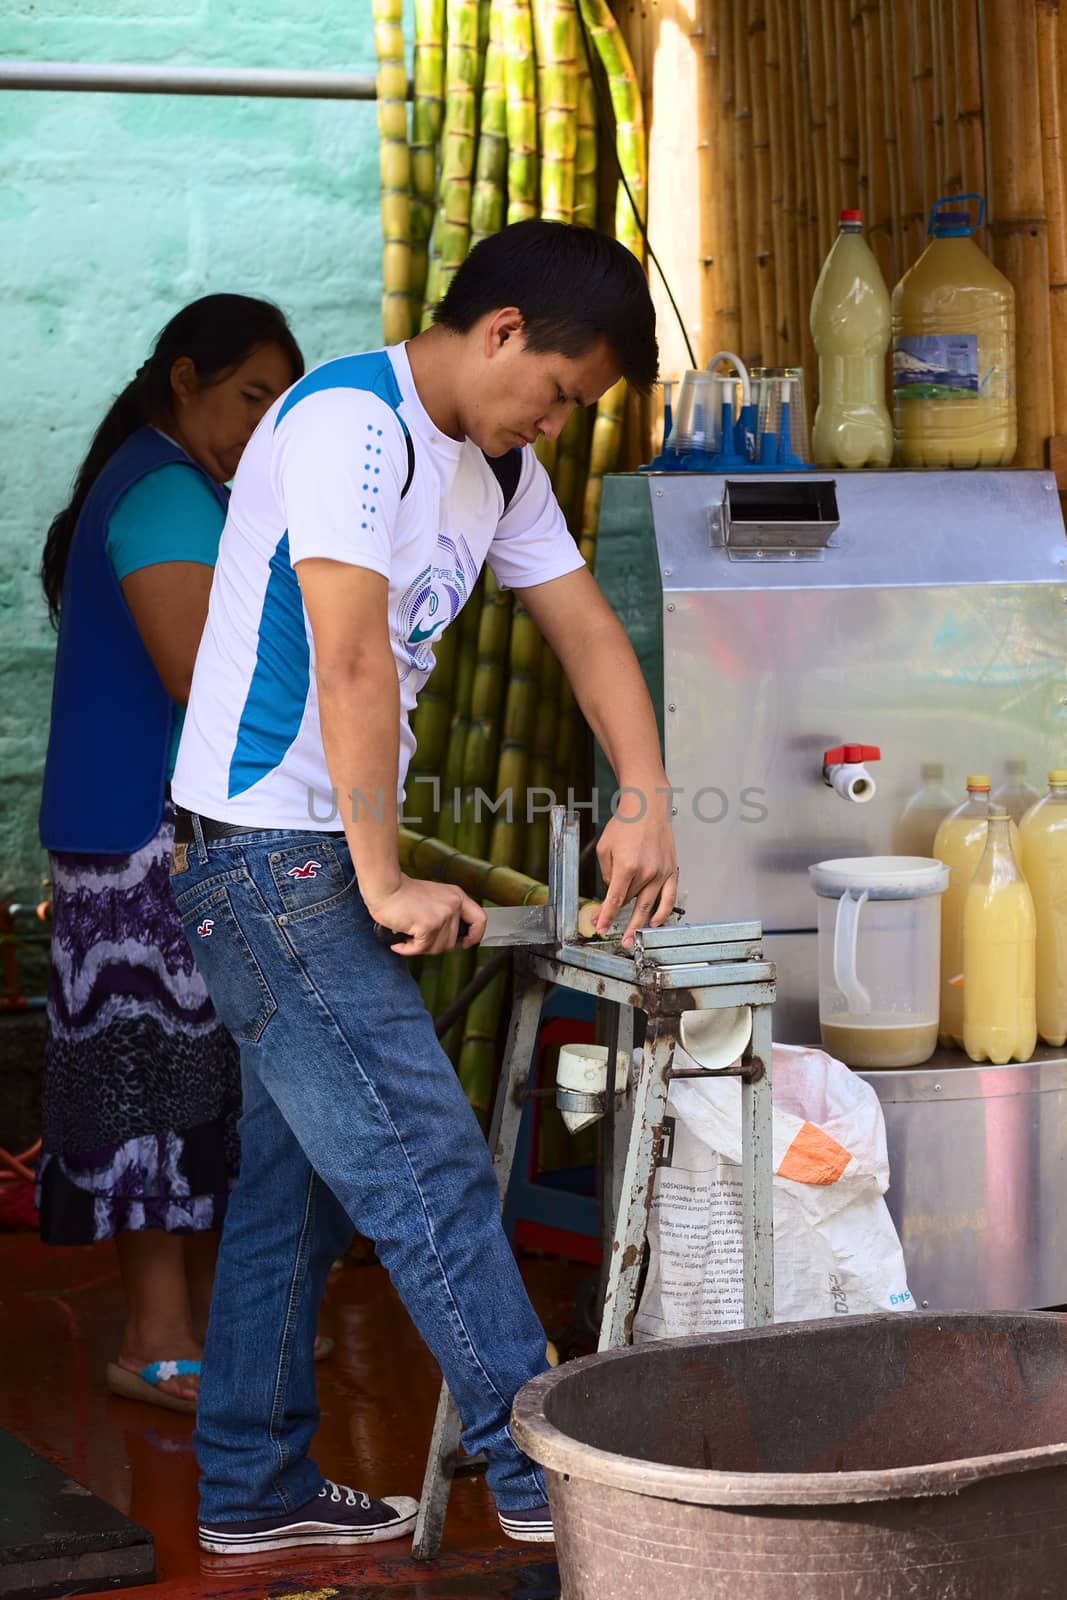 BANOS, ECUADOR - FEBRUARY 26, 2014: Unidentified young man cutting fresh sugar cane, which is either being eaten fresh or squeezed as juice, on February 26, 2014 in Banos, Ecuador. In Banos, there are many stands offering fresh sugar cane,  its juice or candy called Melcocha made from it.